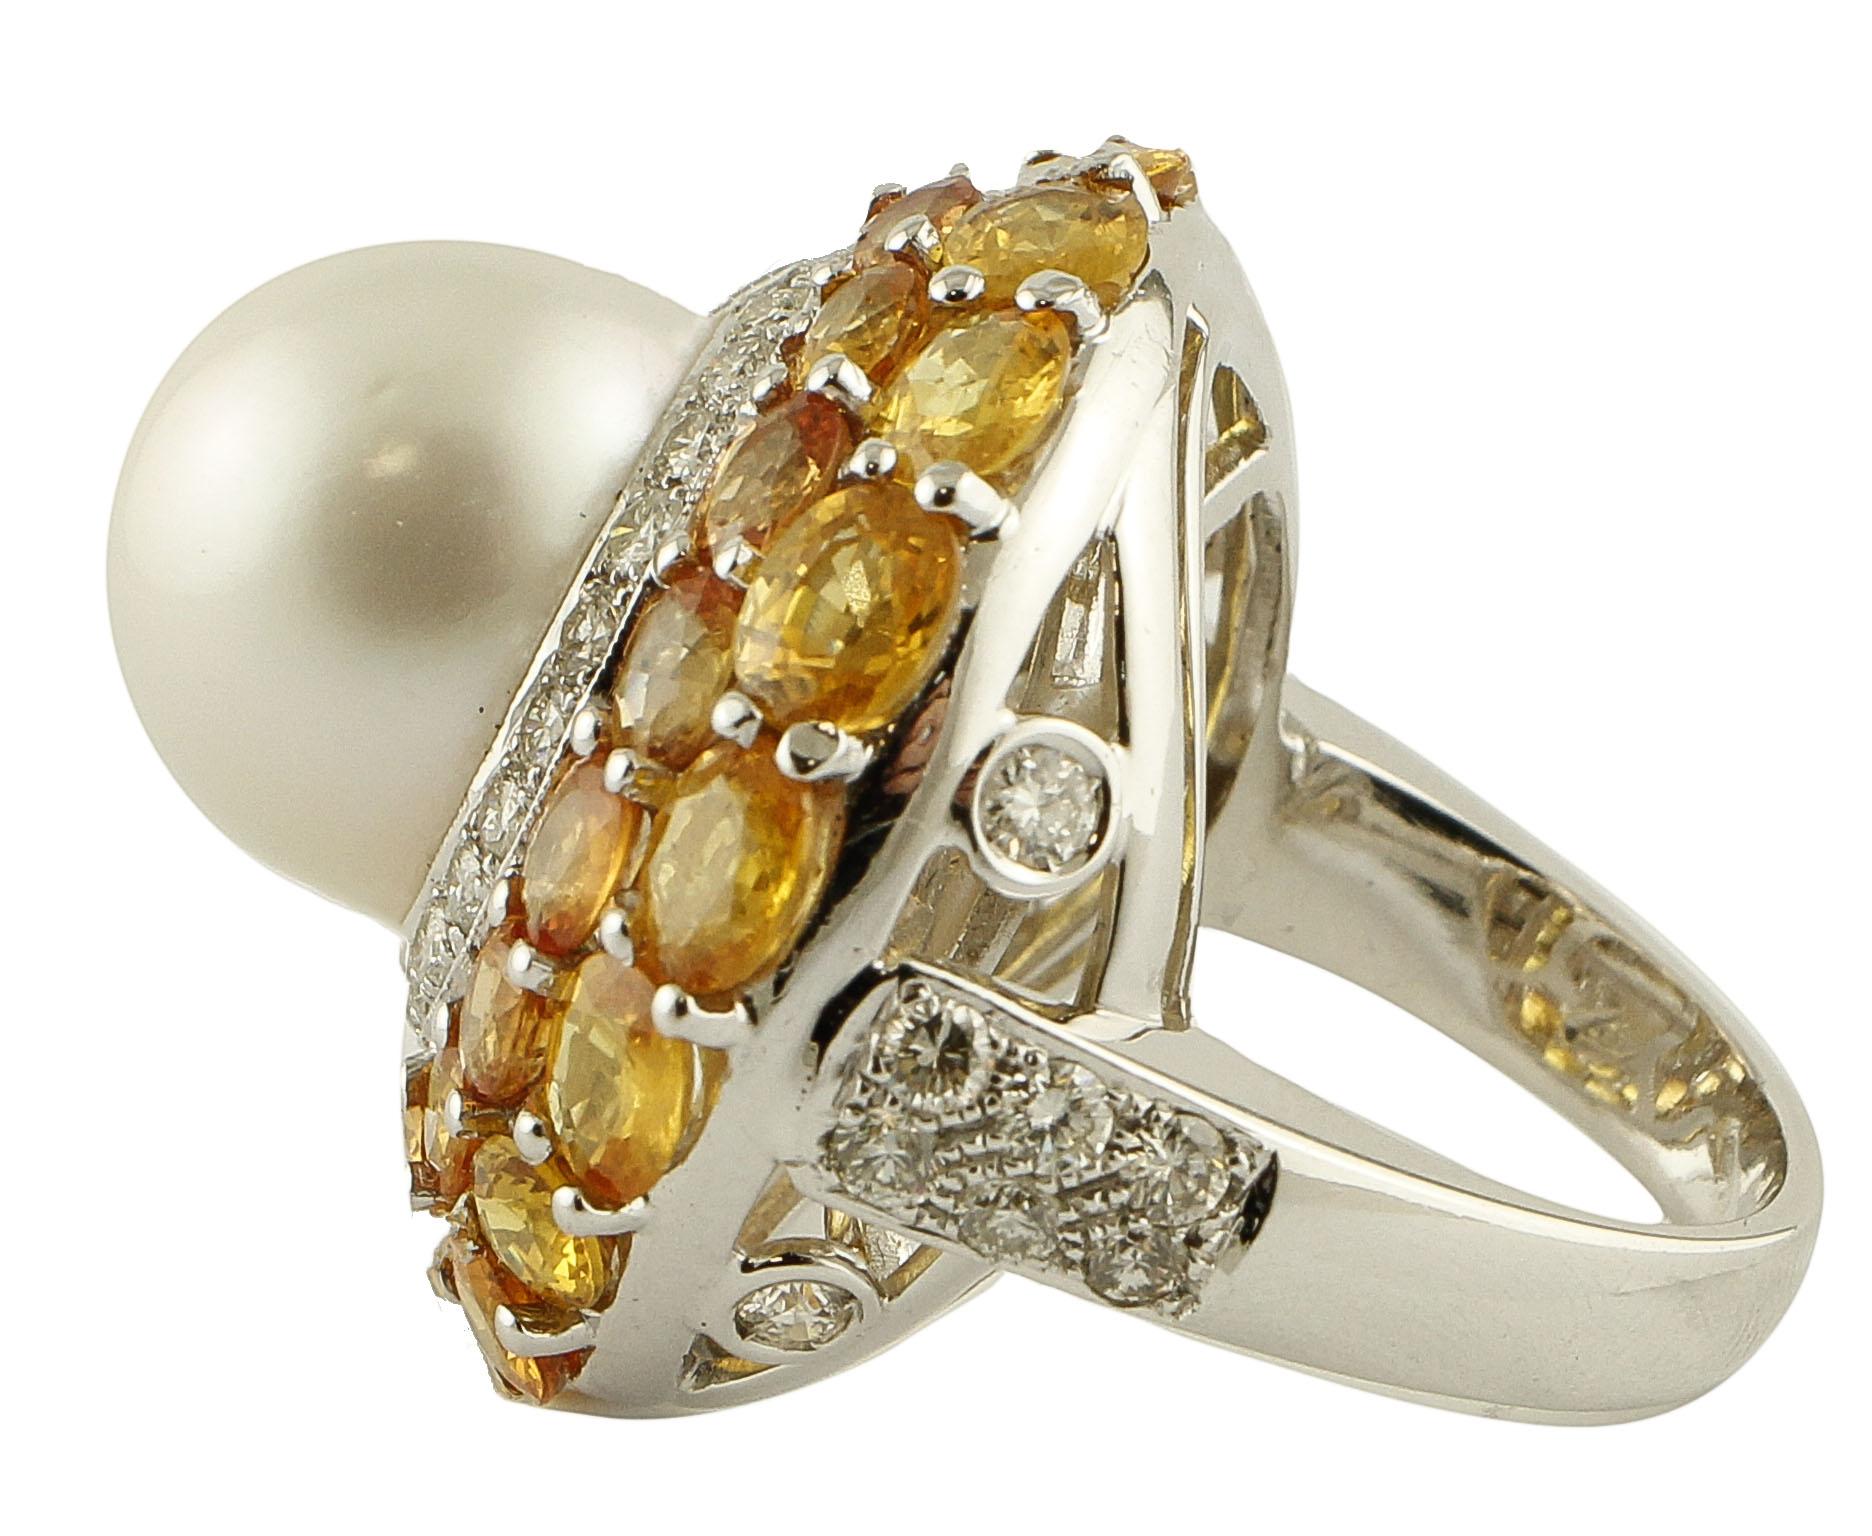 Fabulous cluster ring in 14K white gold structure mounted with 4 g of glossy white pearl (14 mm) in the center surrounded by diamonds crown and studded all around by 13.20 ct of yellow sapphires.
Diamonds 1.75 ct 
Yellow Sapphires 13.20 ct
Pearl 4 g